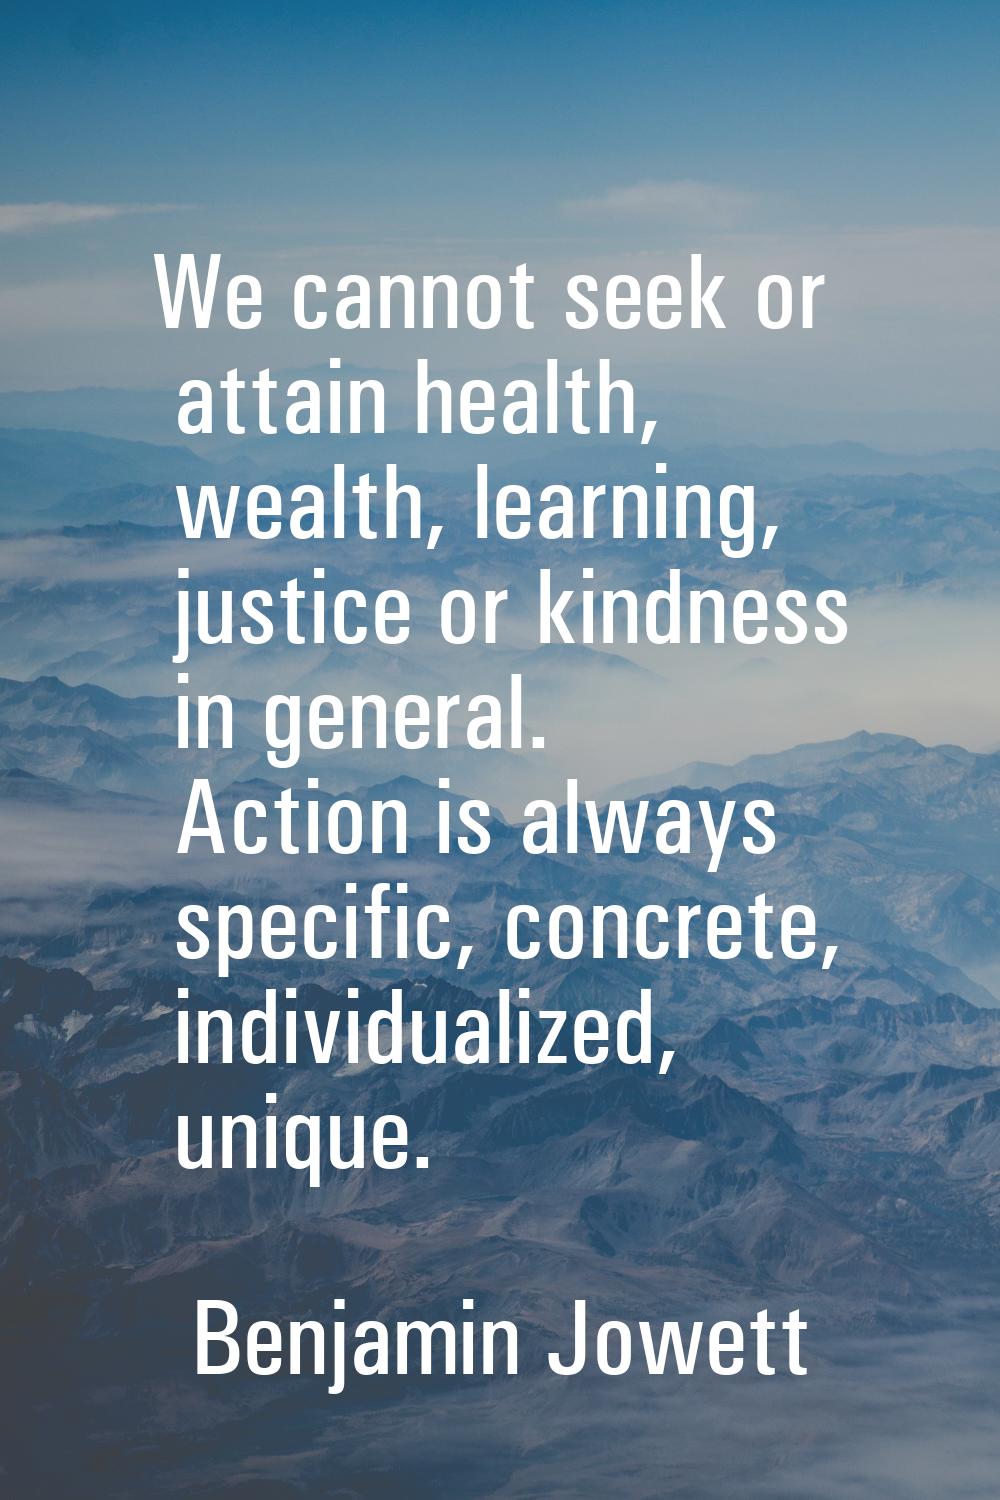 We cannot seek or attain health, wealth, learning, justice or kindness in general. Action is always